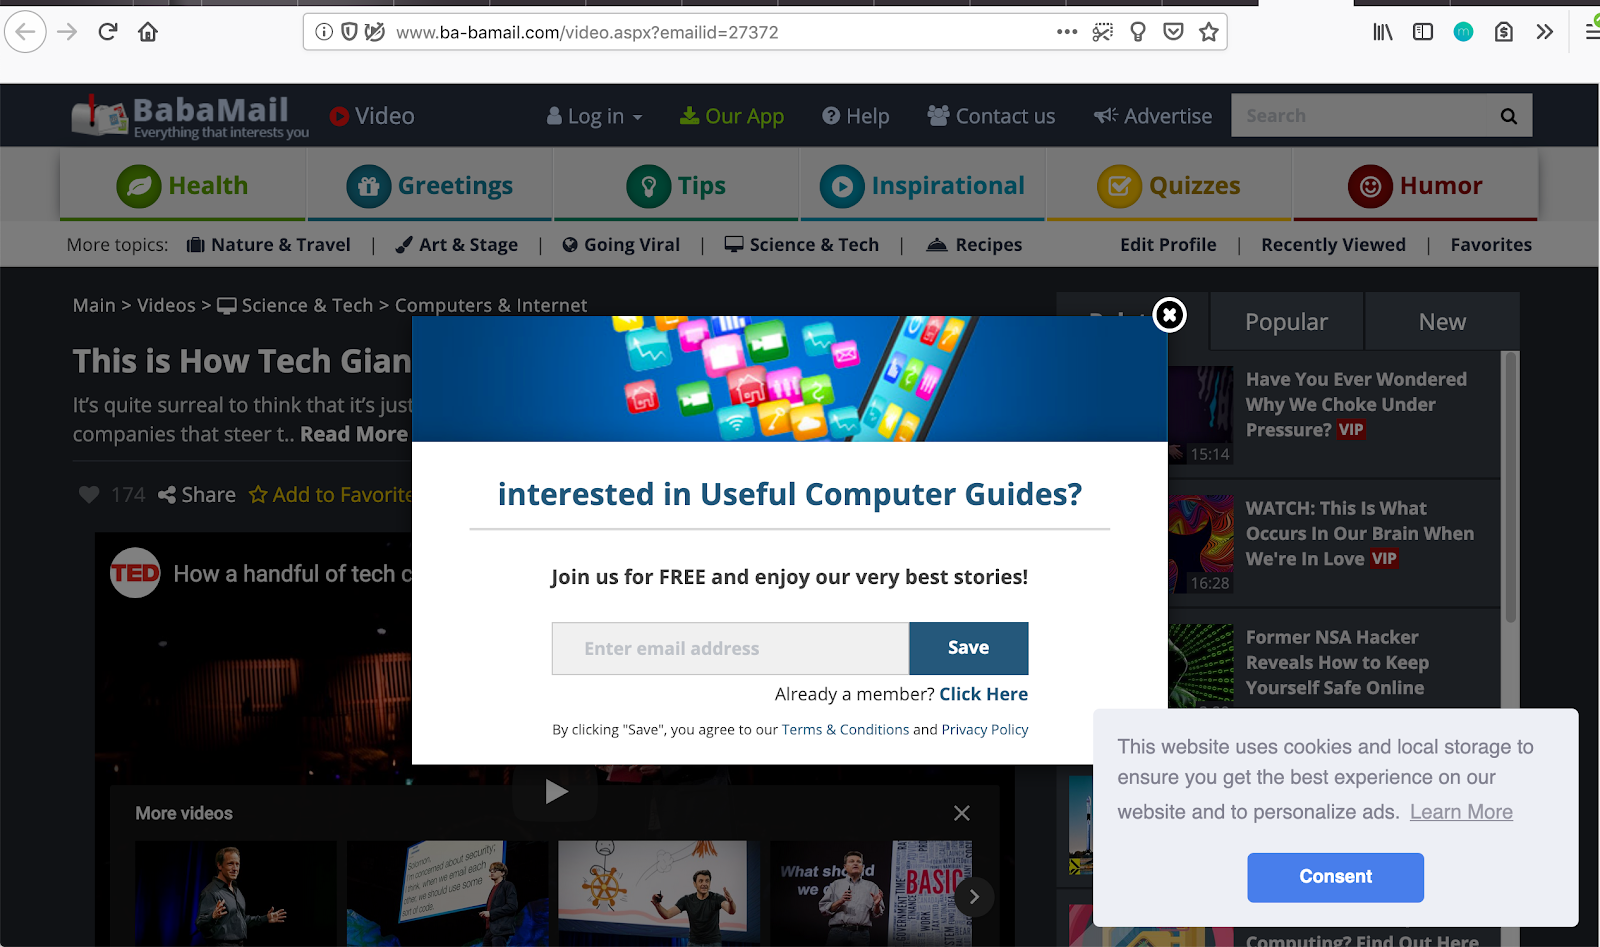 A modal in the center of the screen reads "Interested in useful computer guides?" with a email signup form. 